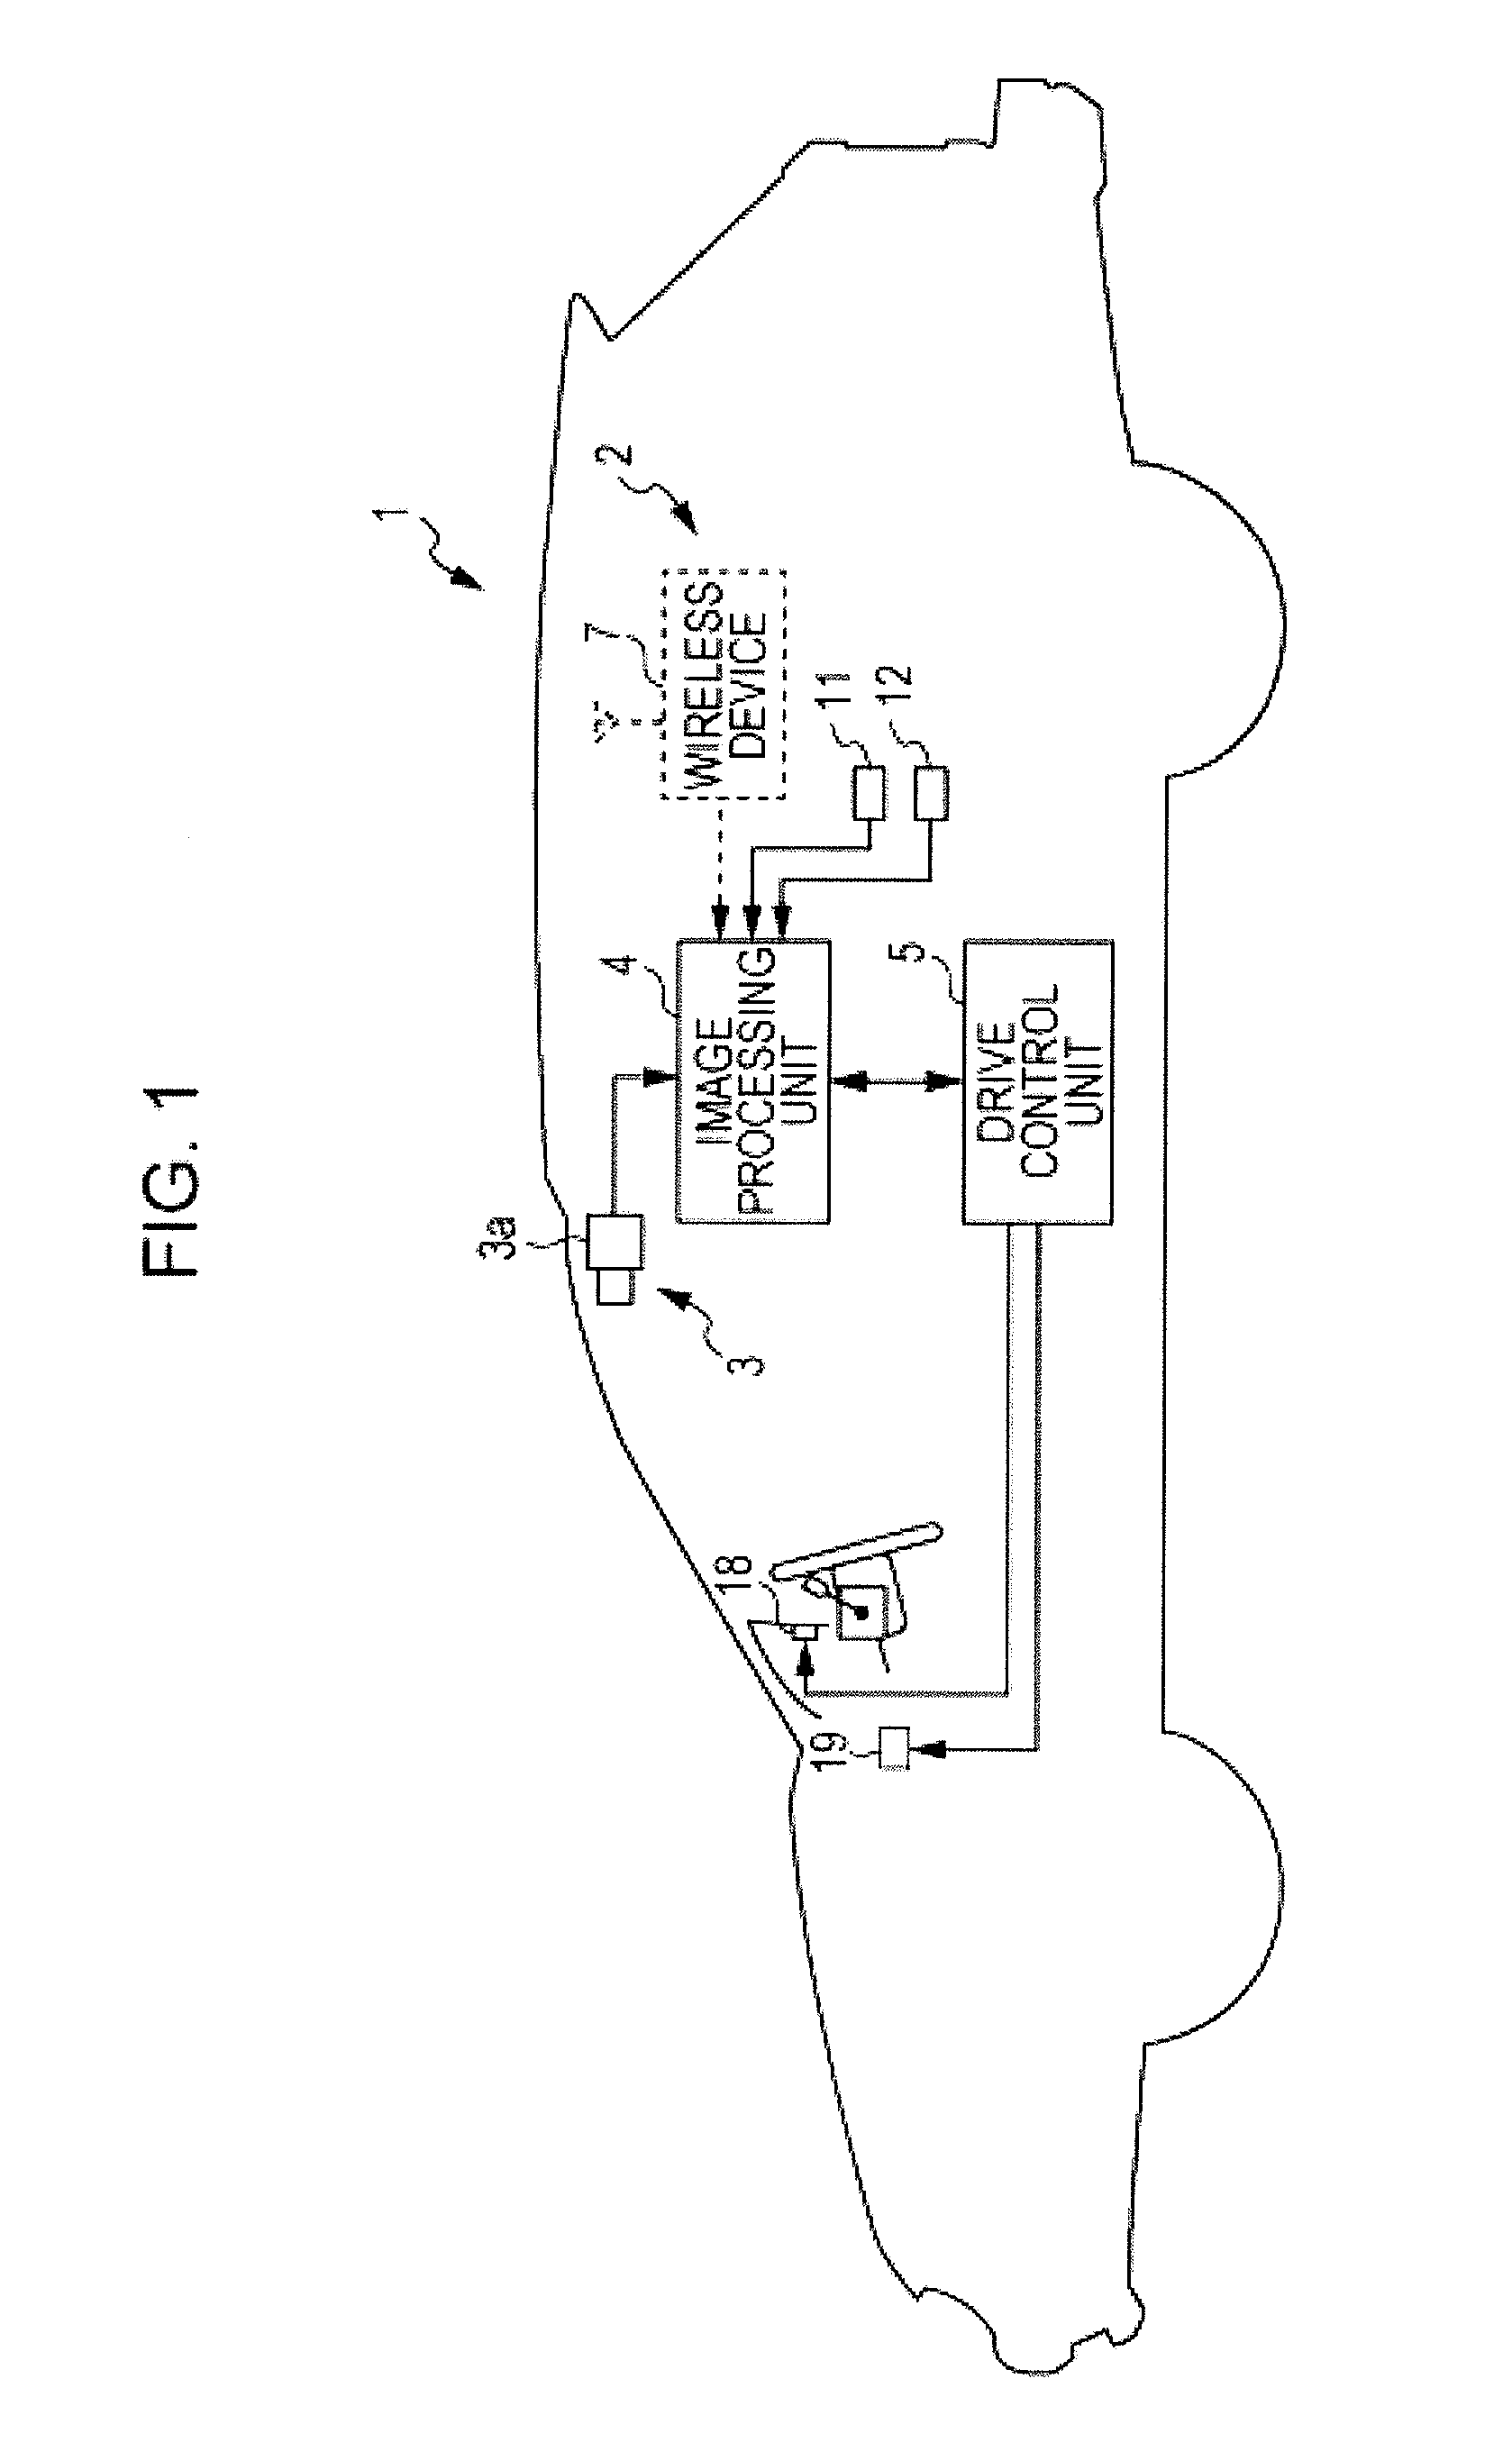 Stop line recognition device